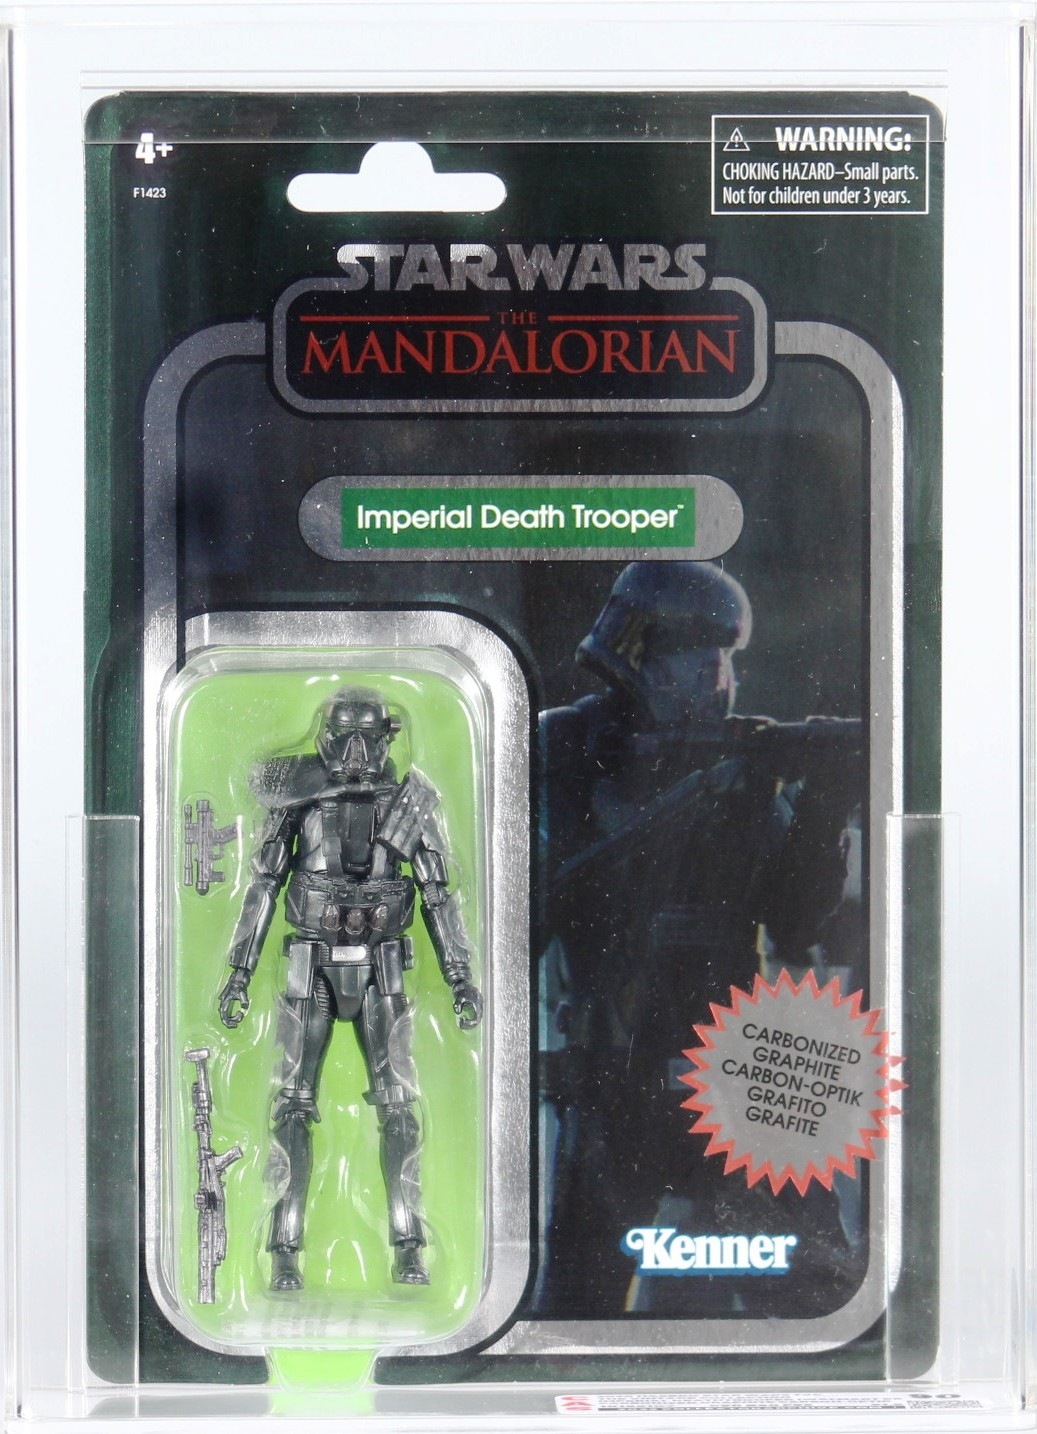 Star Wars The Mandalorian Imperial Death Trooper Carbonized Action Figure Hasbro 